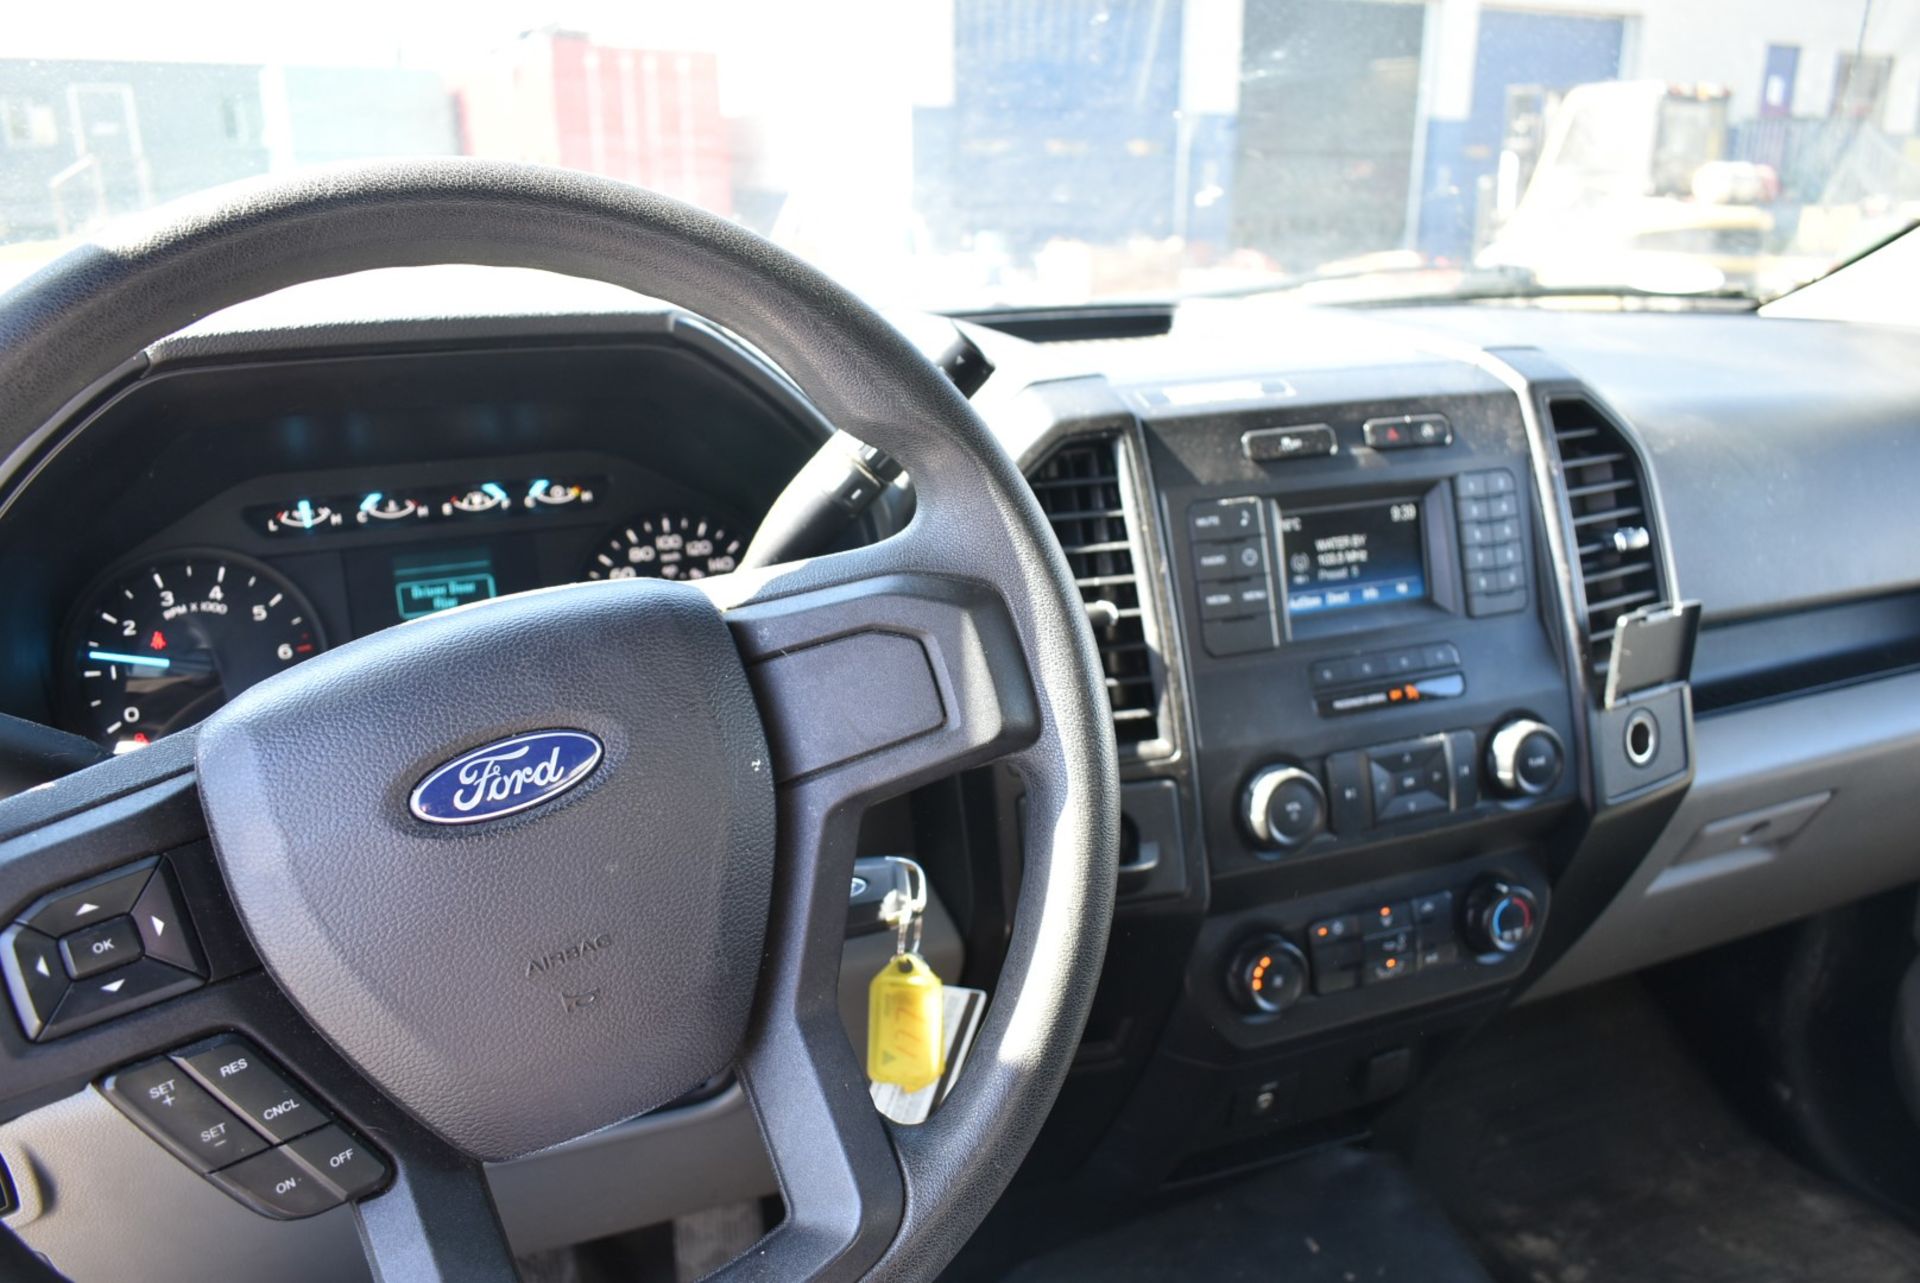 FORD (2019) F150 XL PICKUP TRUCK WITH 5.0L 8 CYL. GAS ENGINE, AUTO. TRANSMISSION, RWD, BED CAP, 54, - Image 11 of 13